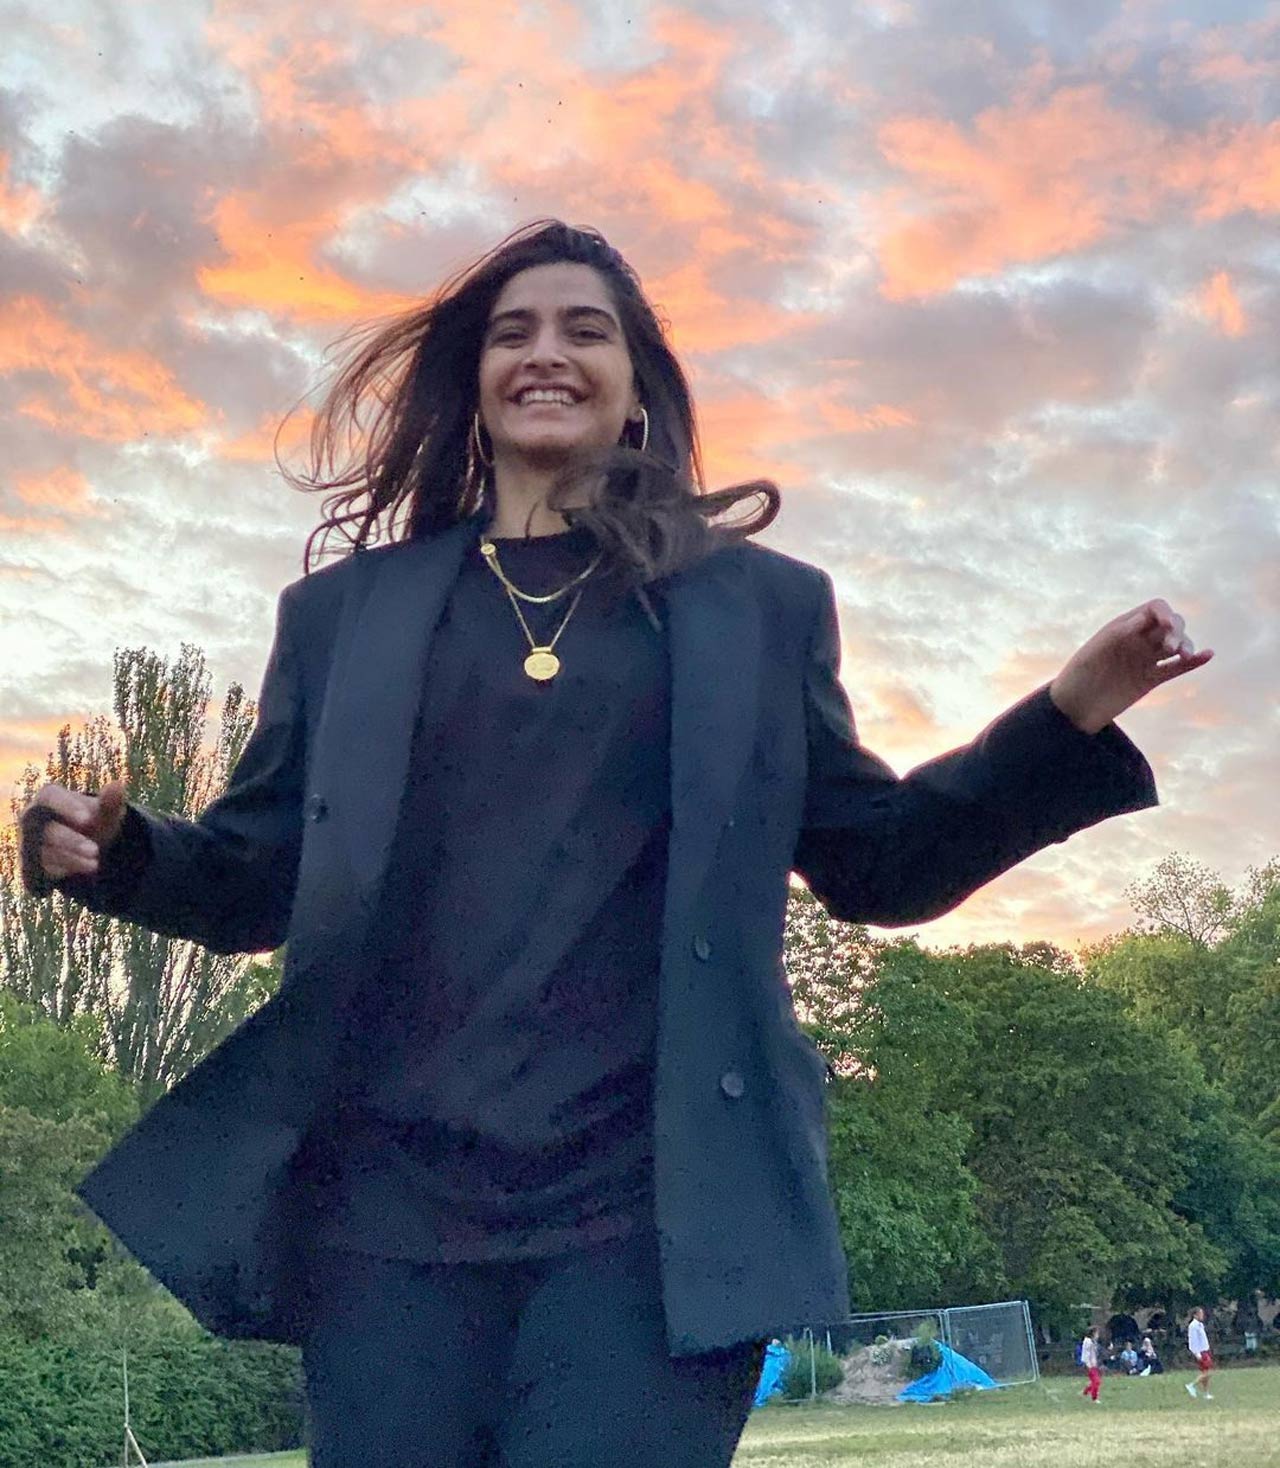 Sonam Kapoor's sister and producer Rhea Kapoor too shared a series of pictures from their Parisian vacation, which was filled with love, food and beautiful locales. The Kapoor sisters and their husbands were painting the town red, as they spent some quality time together, celebrating the mom-to-be's birthday